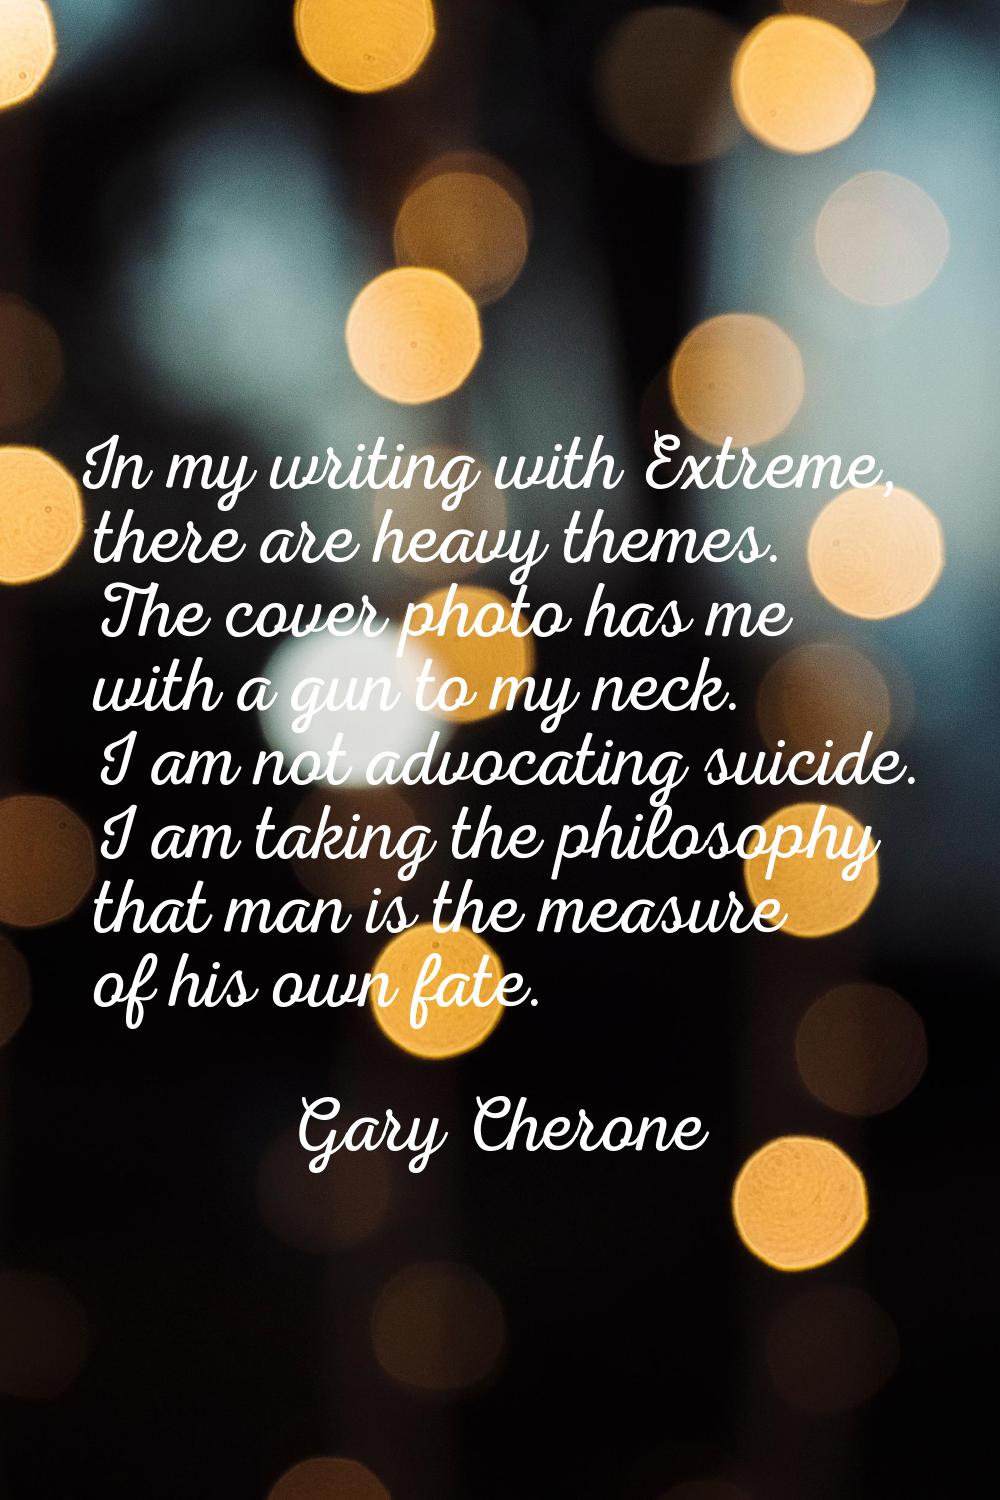 In my writing with Extreme, there are heavy themes. The cover photo has me with a gun to my neck. I